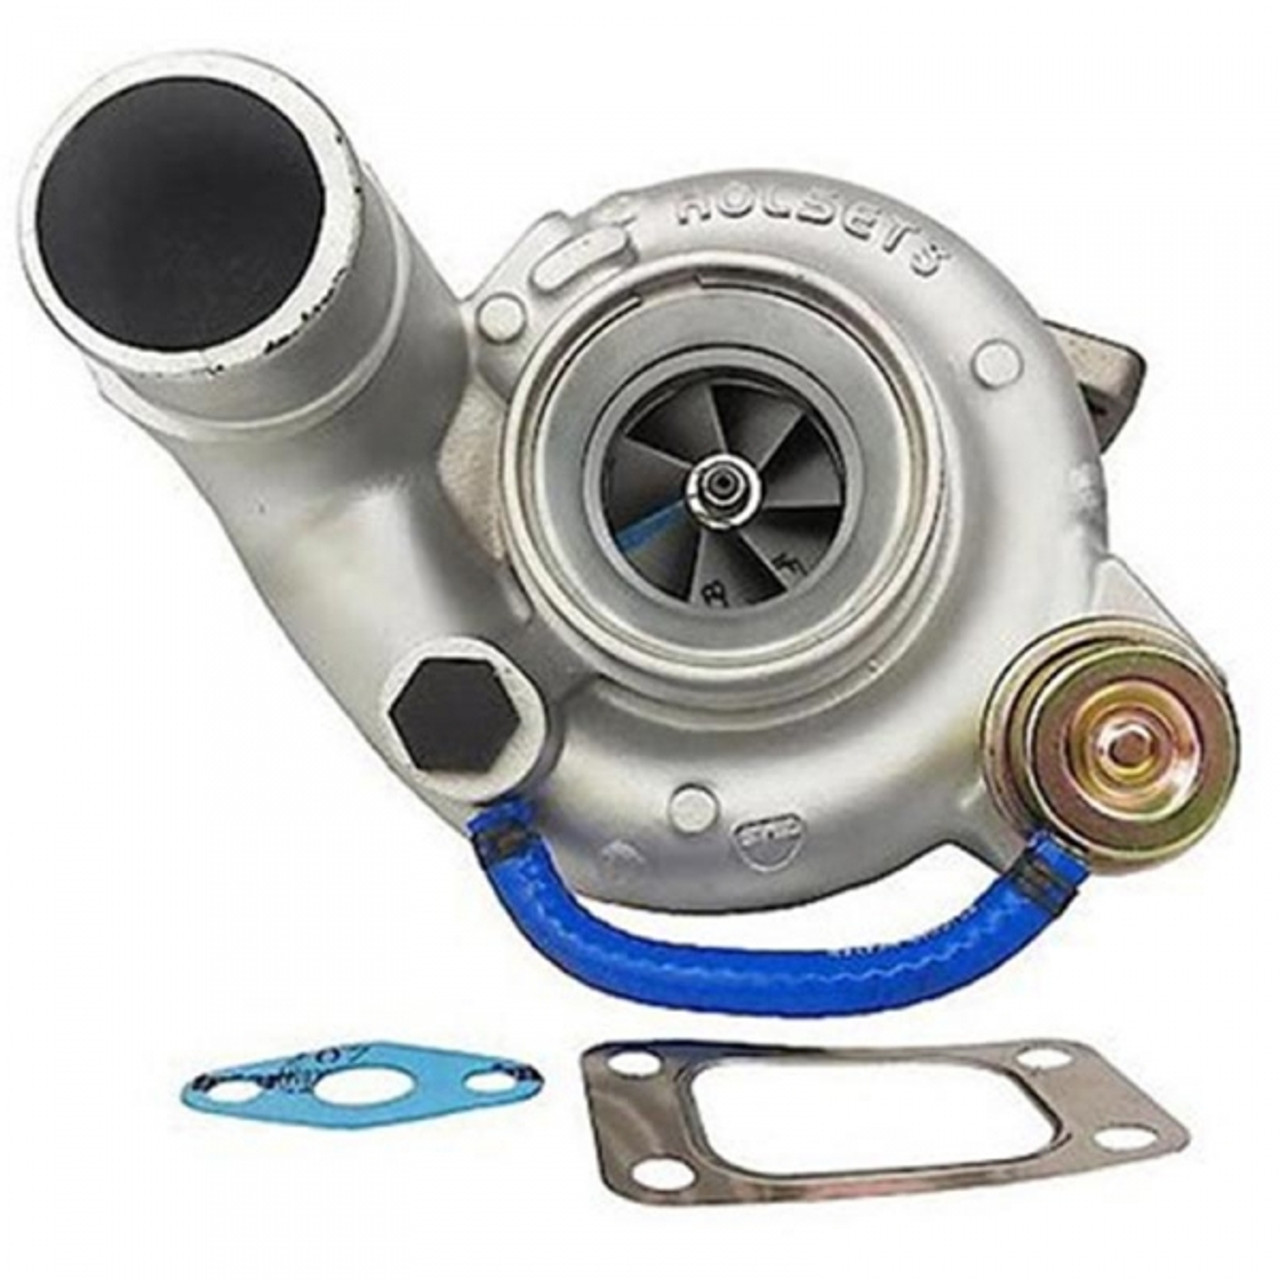  INDUSTRIAL INJECTION REMAN STOCK REPLACEMENT TURBOCHARGER 2003-2004 DODGE 5.9L CUMMINS (II4035044SE)Turbo And Kit View